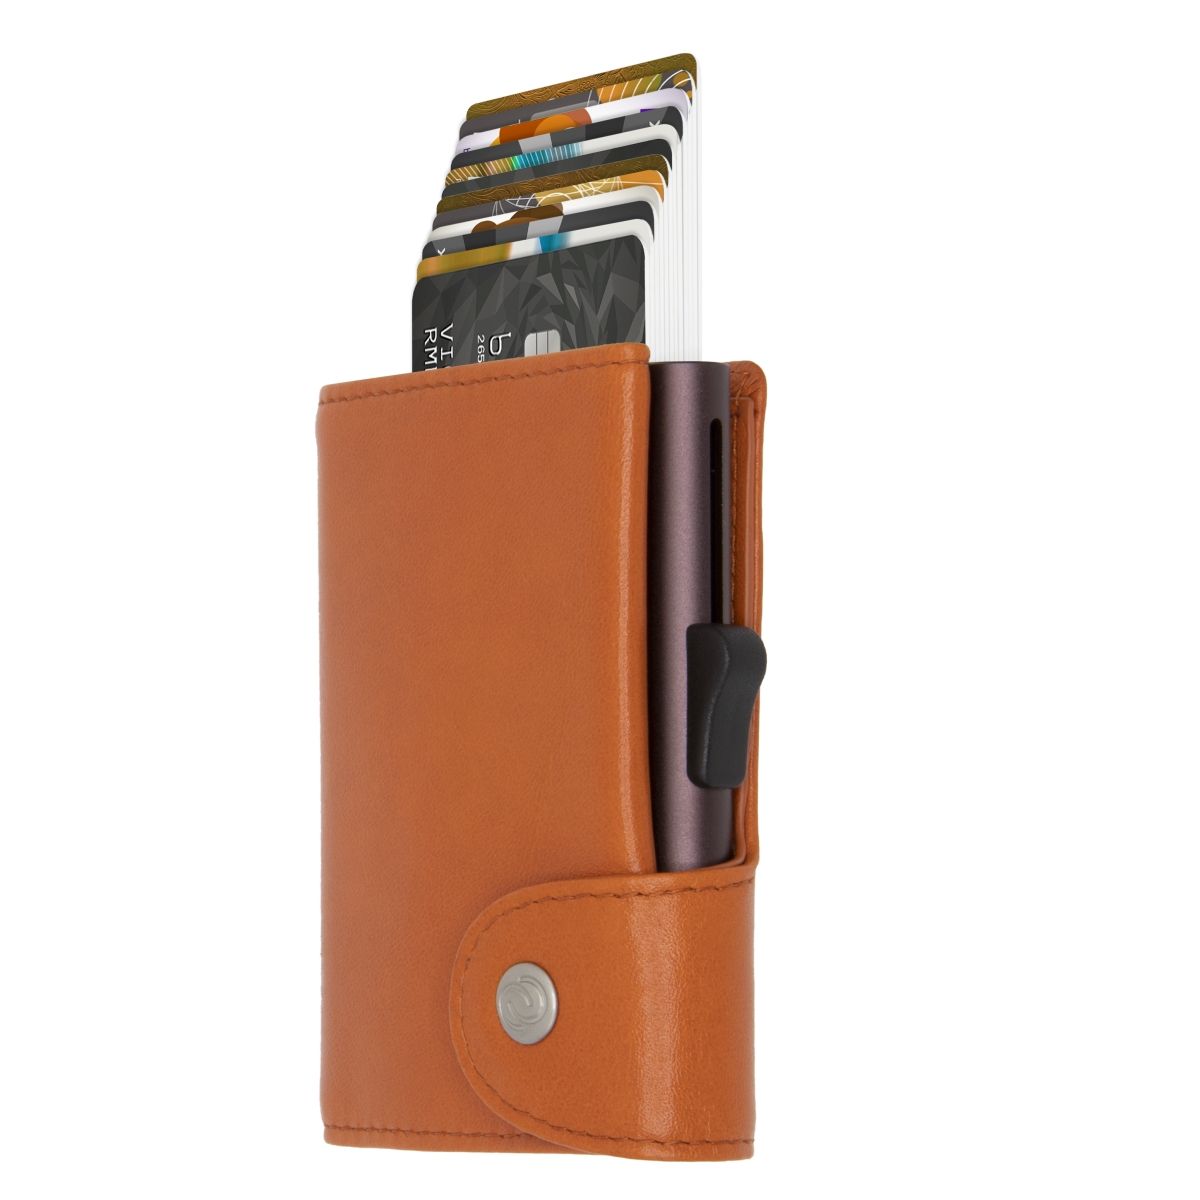 C-Secure XL Aluminum Wallet with Vegetable Genuine Leather and Coins Pocket - Brown Macchiato